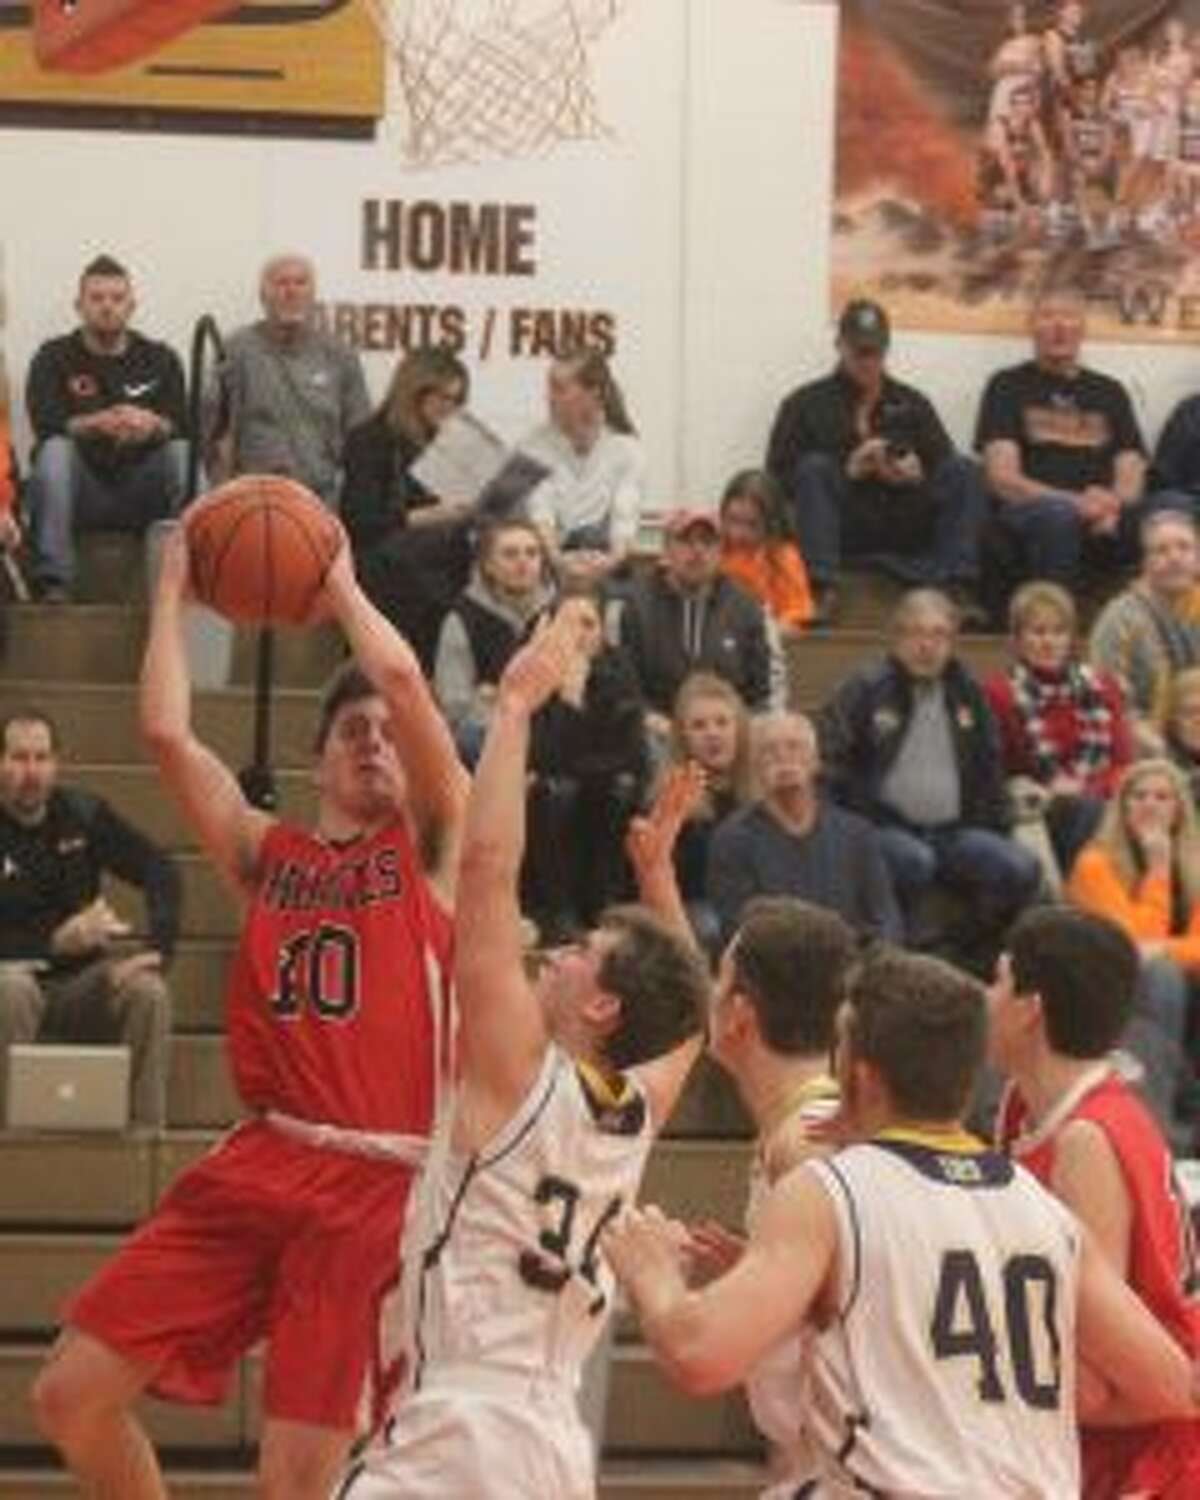 Benzie Central senior Ryan Kennedy tries to battle through contact for a layup. (Photo/Robert Myers)